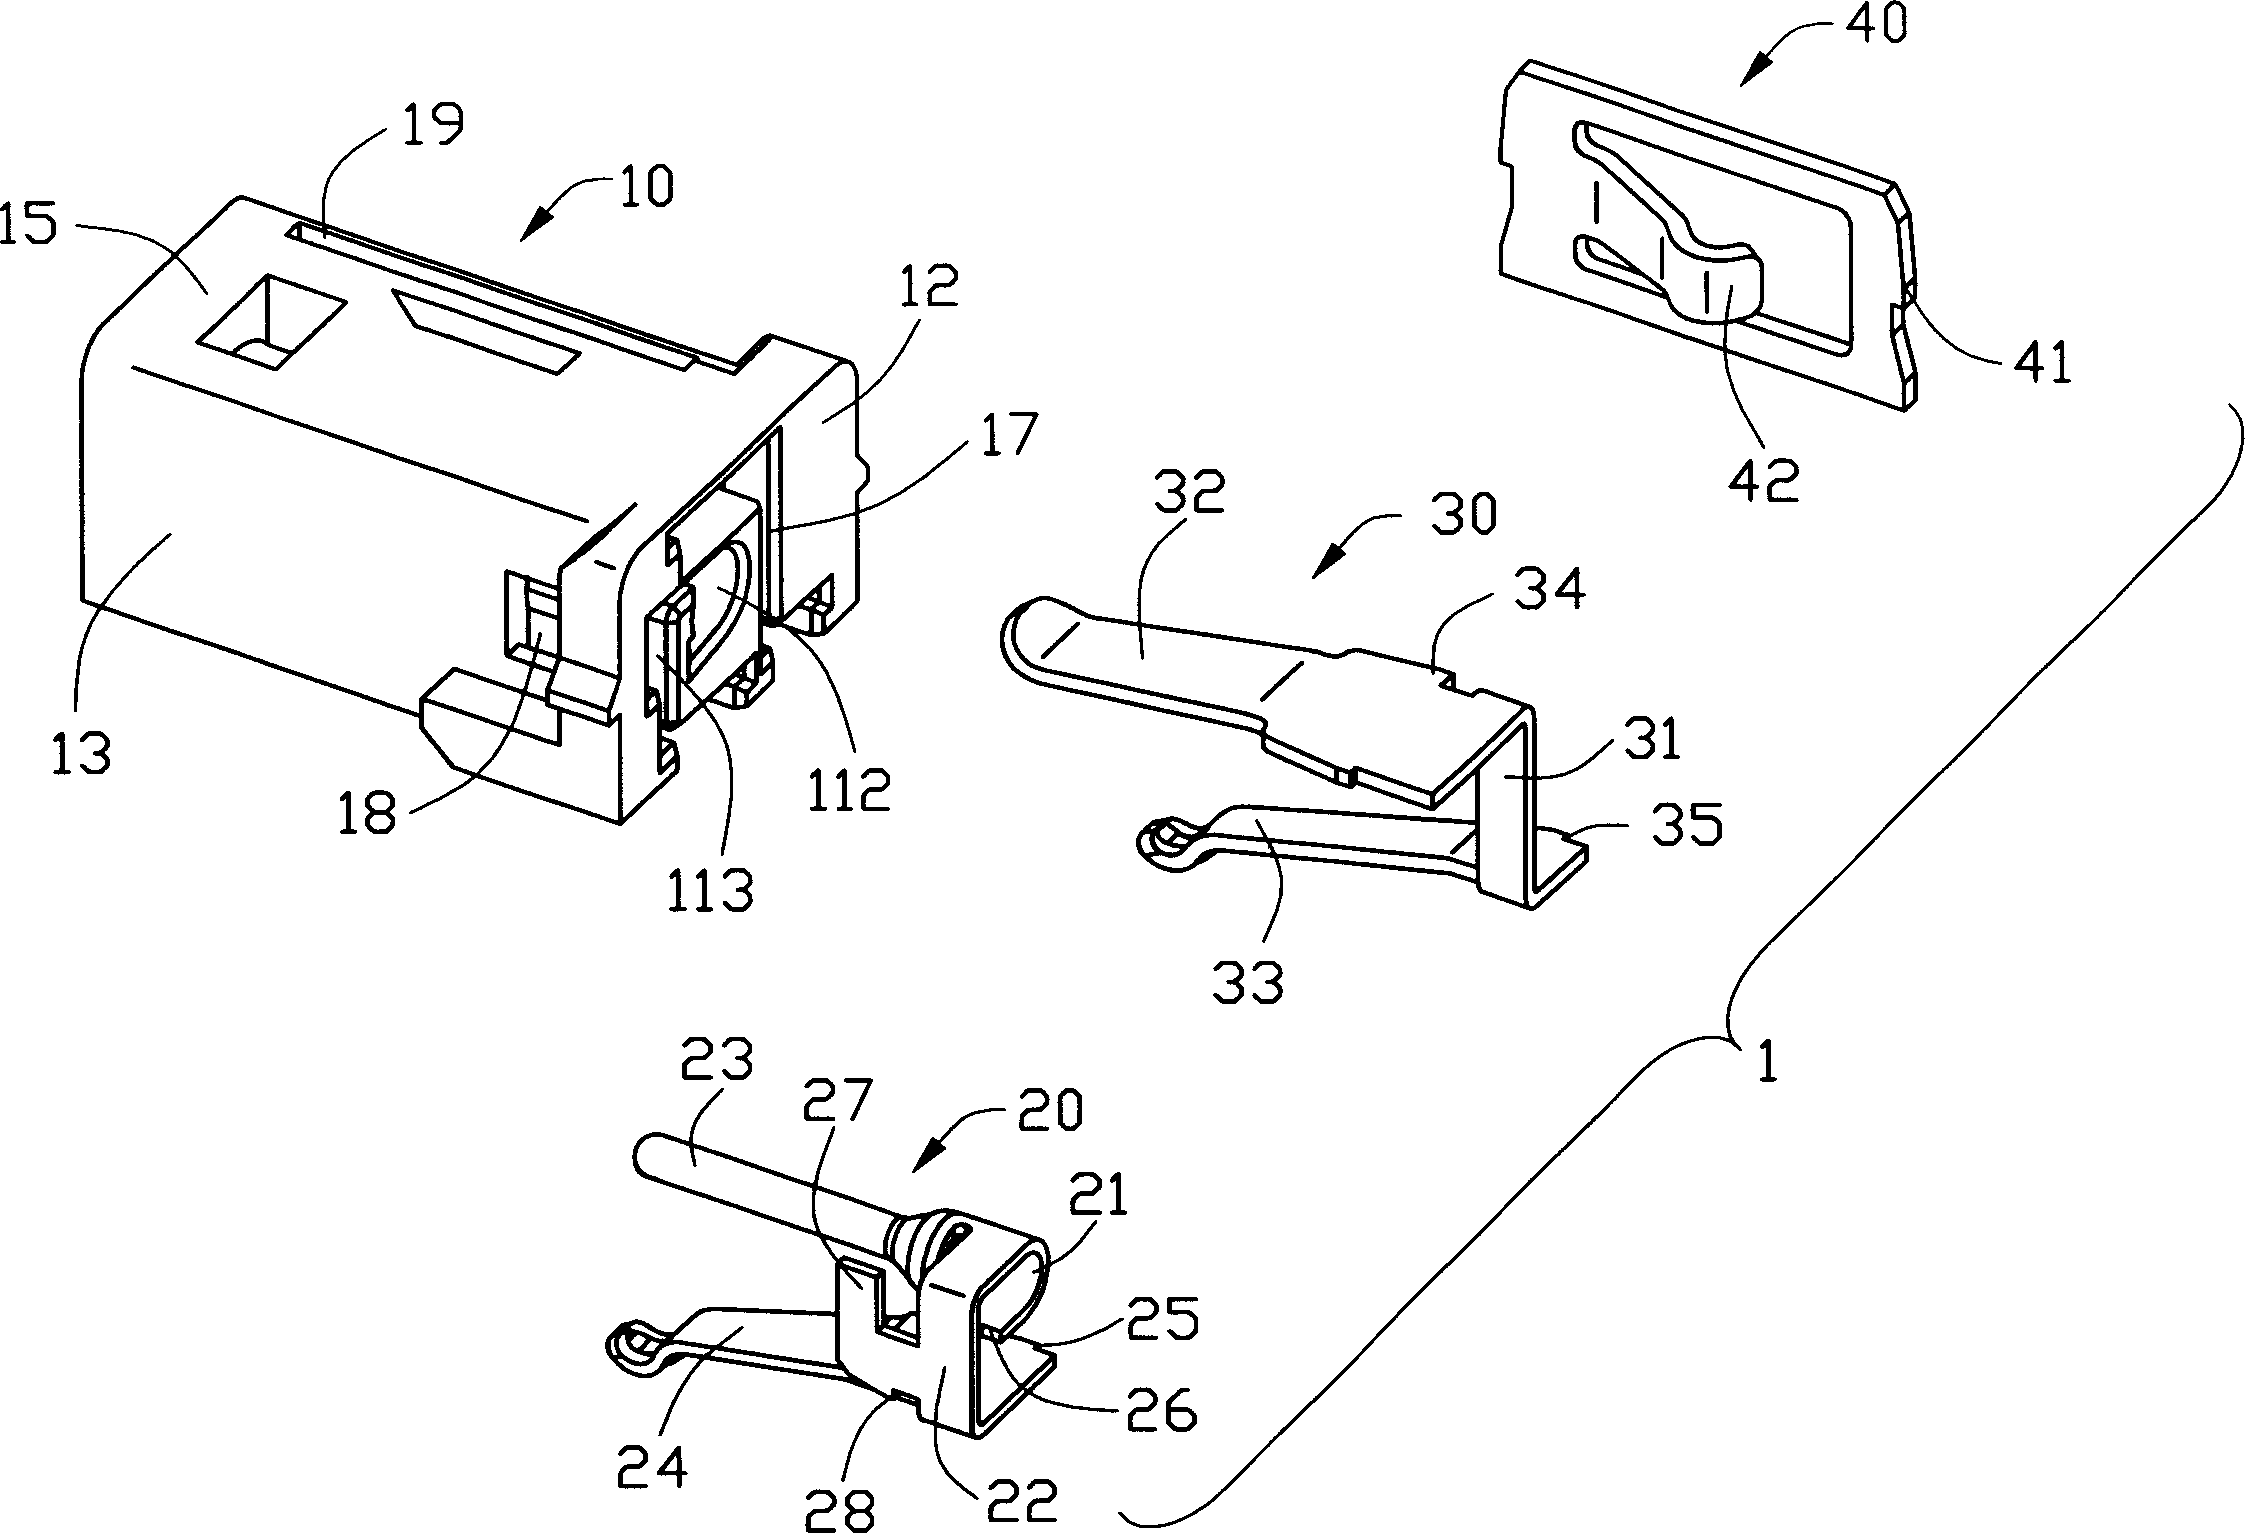 Electric connector manufacturing method